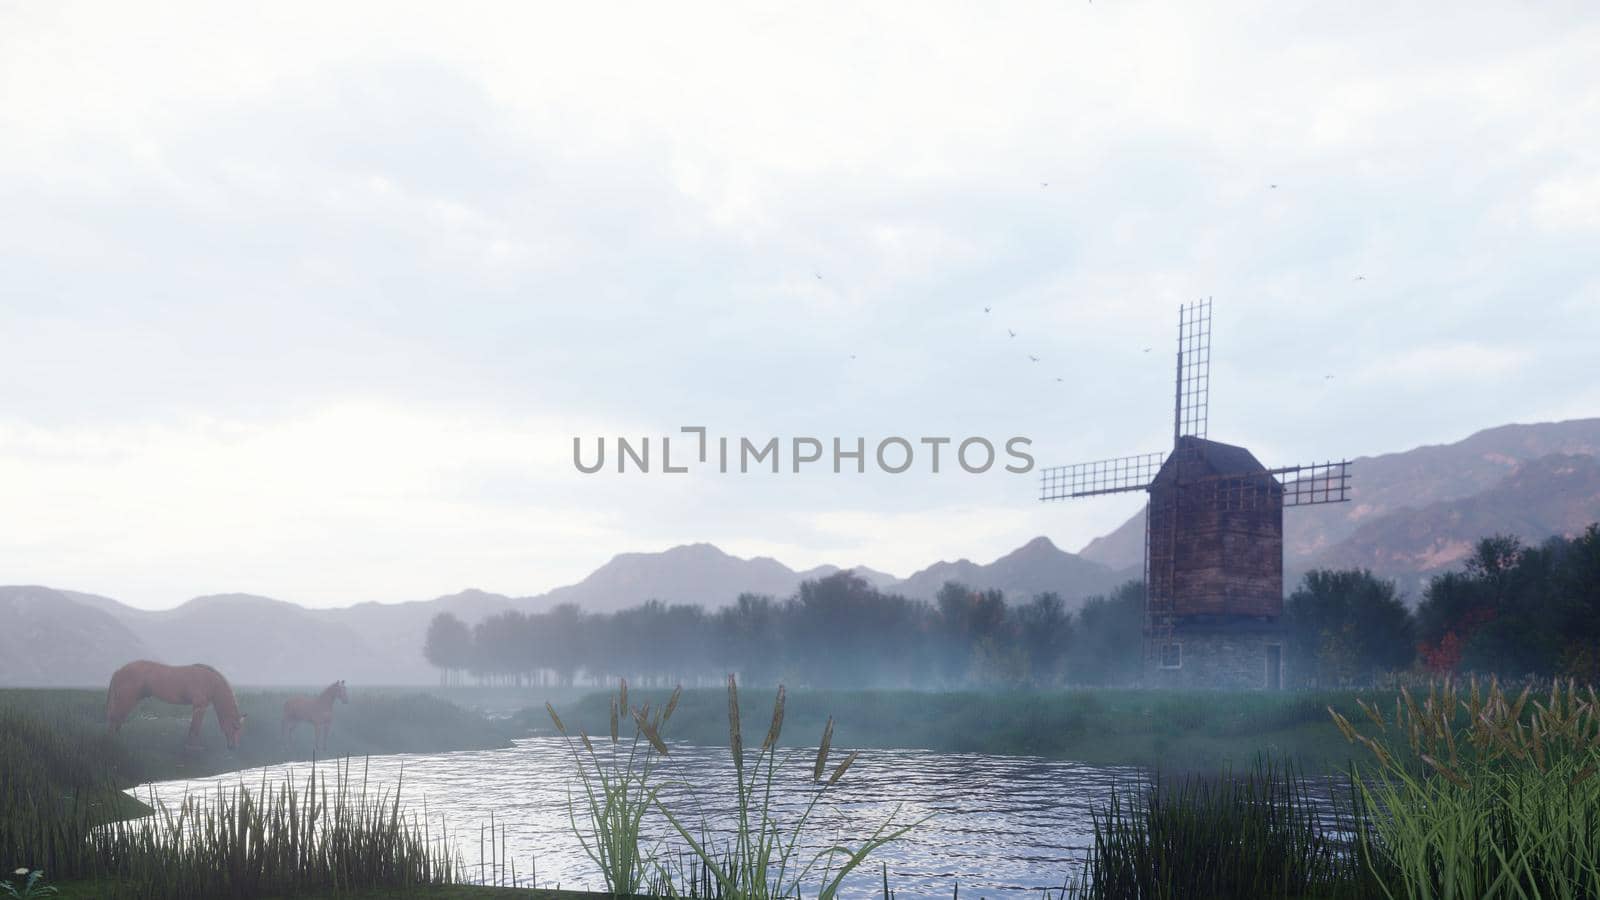 A rural misty morning landscape with an old windmill and horses next to a pond, grasses and plants swaying in the wind background a cloudy sky.